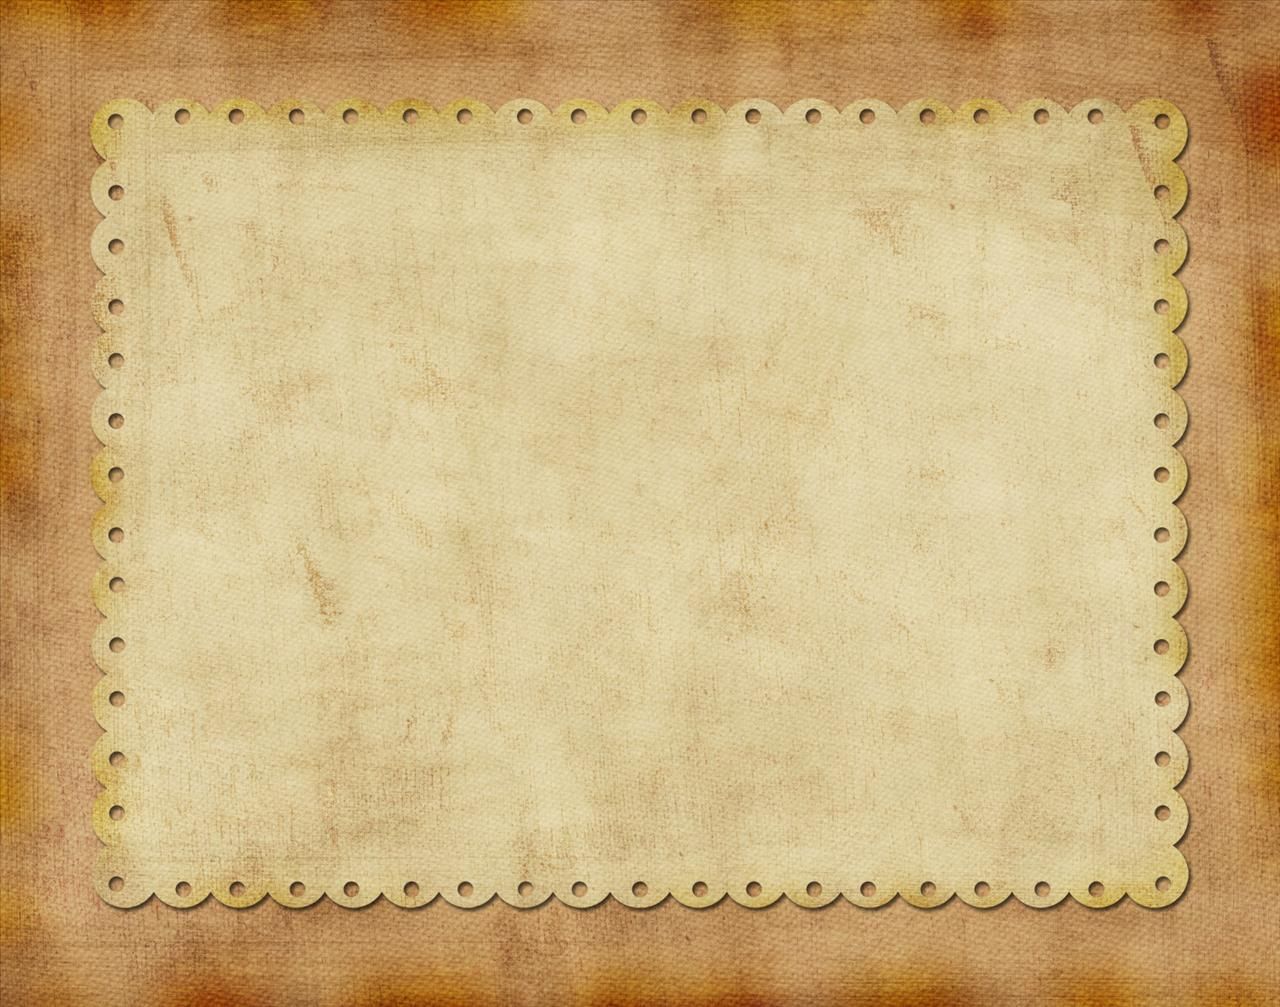 Vintage Scrapbook Background Use This Background In Your